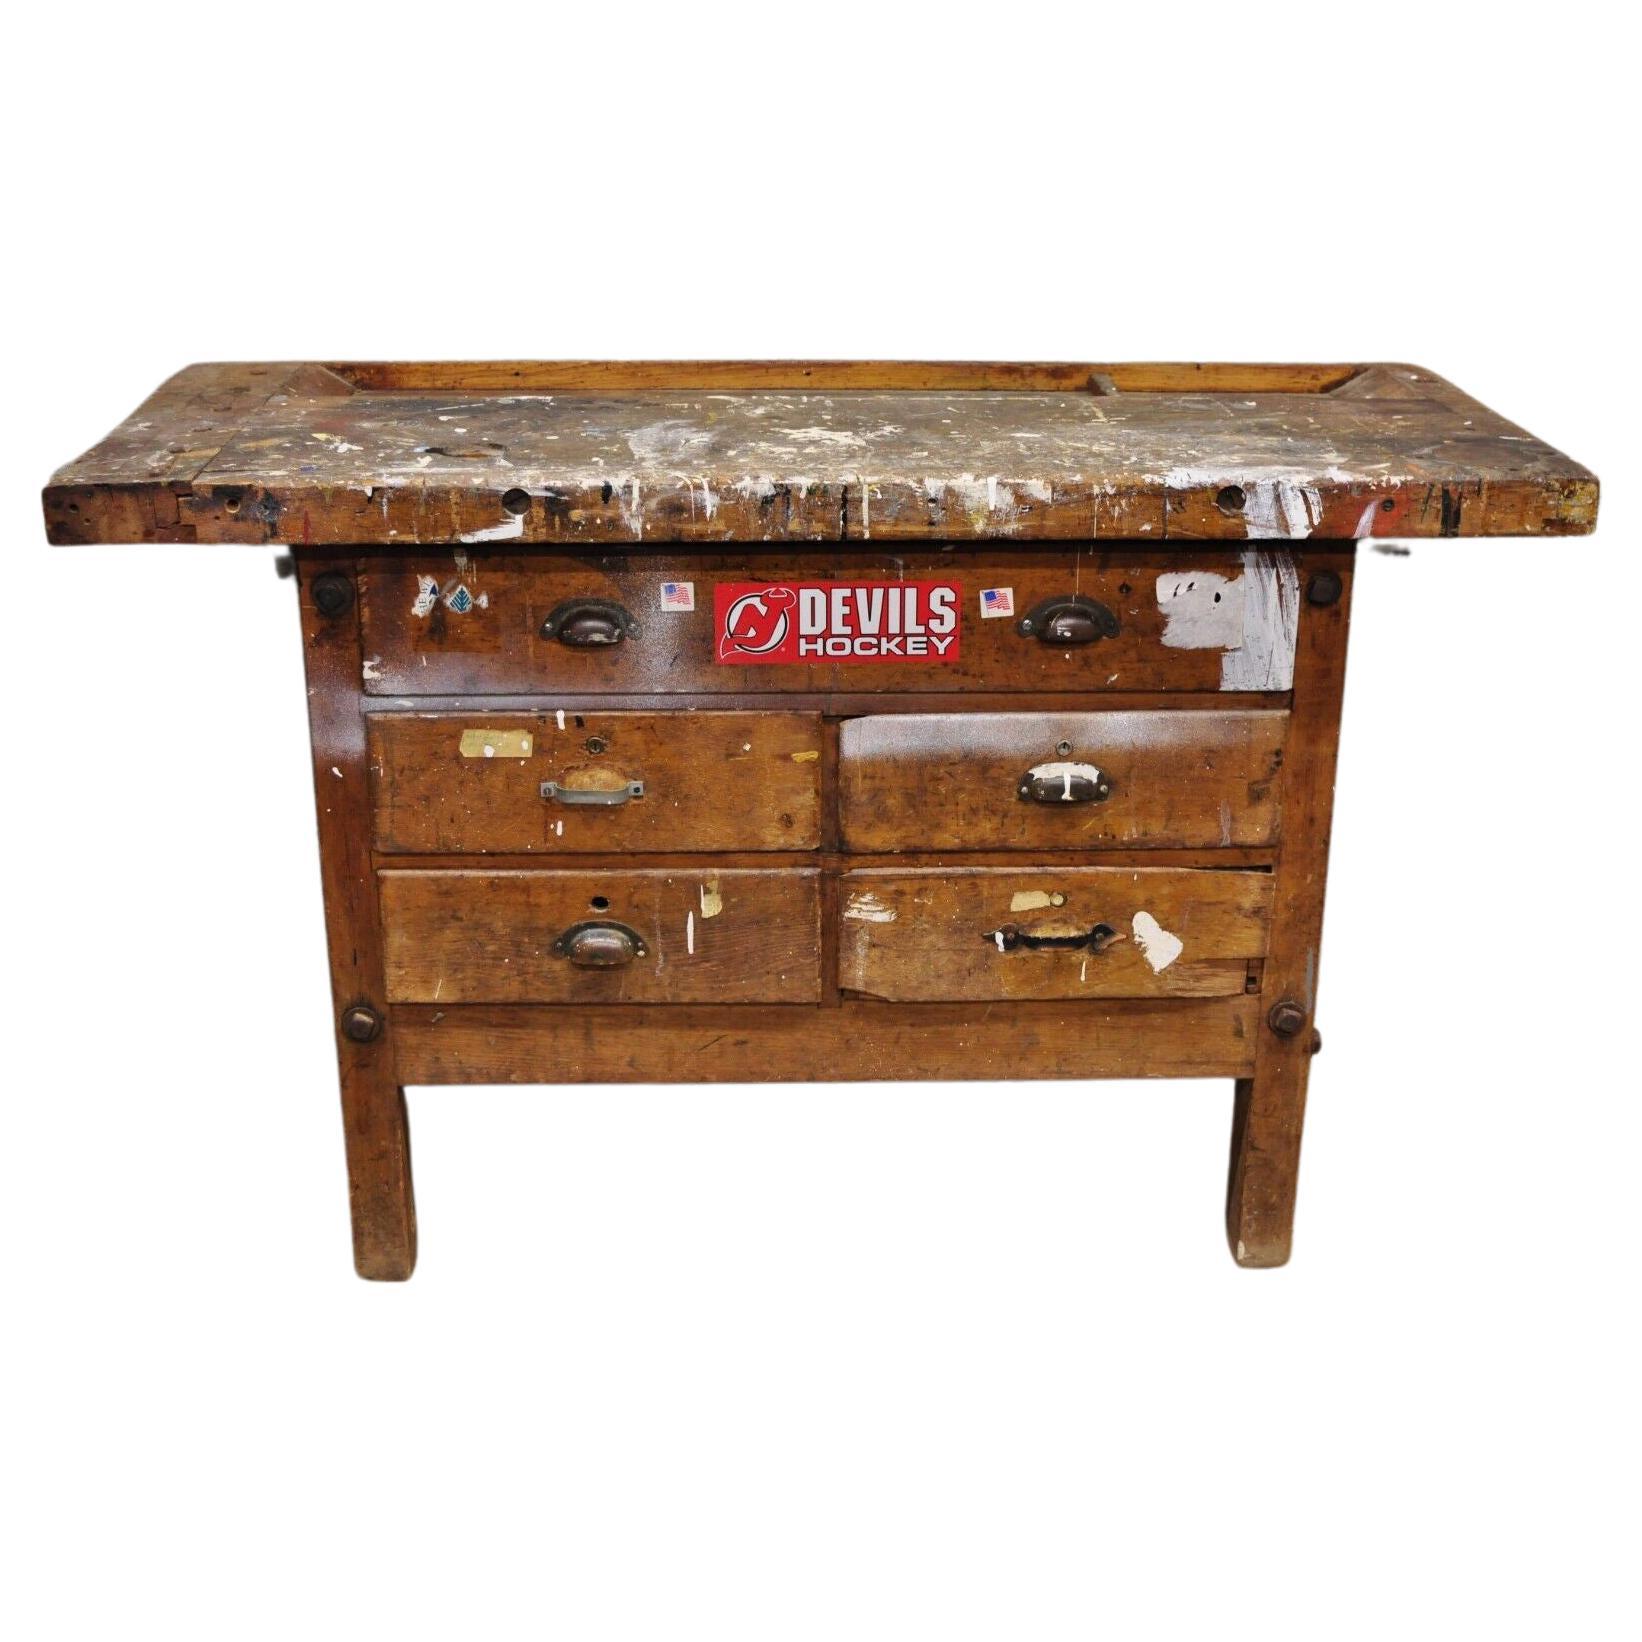 Antique American Industrial Wood Plank Distress Paint Splatter Work Bench Table